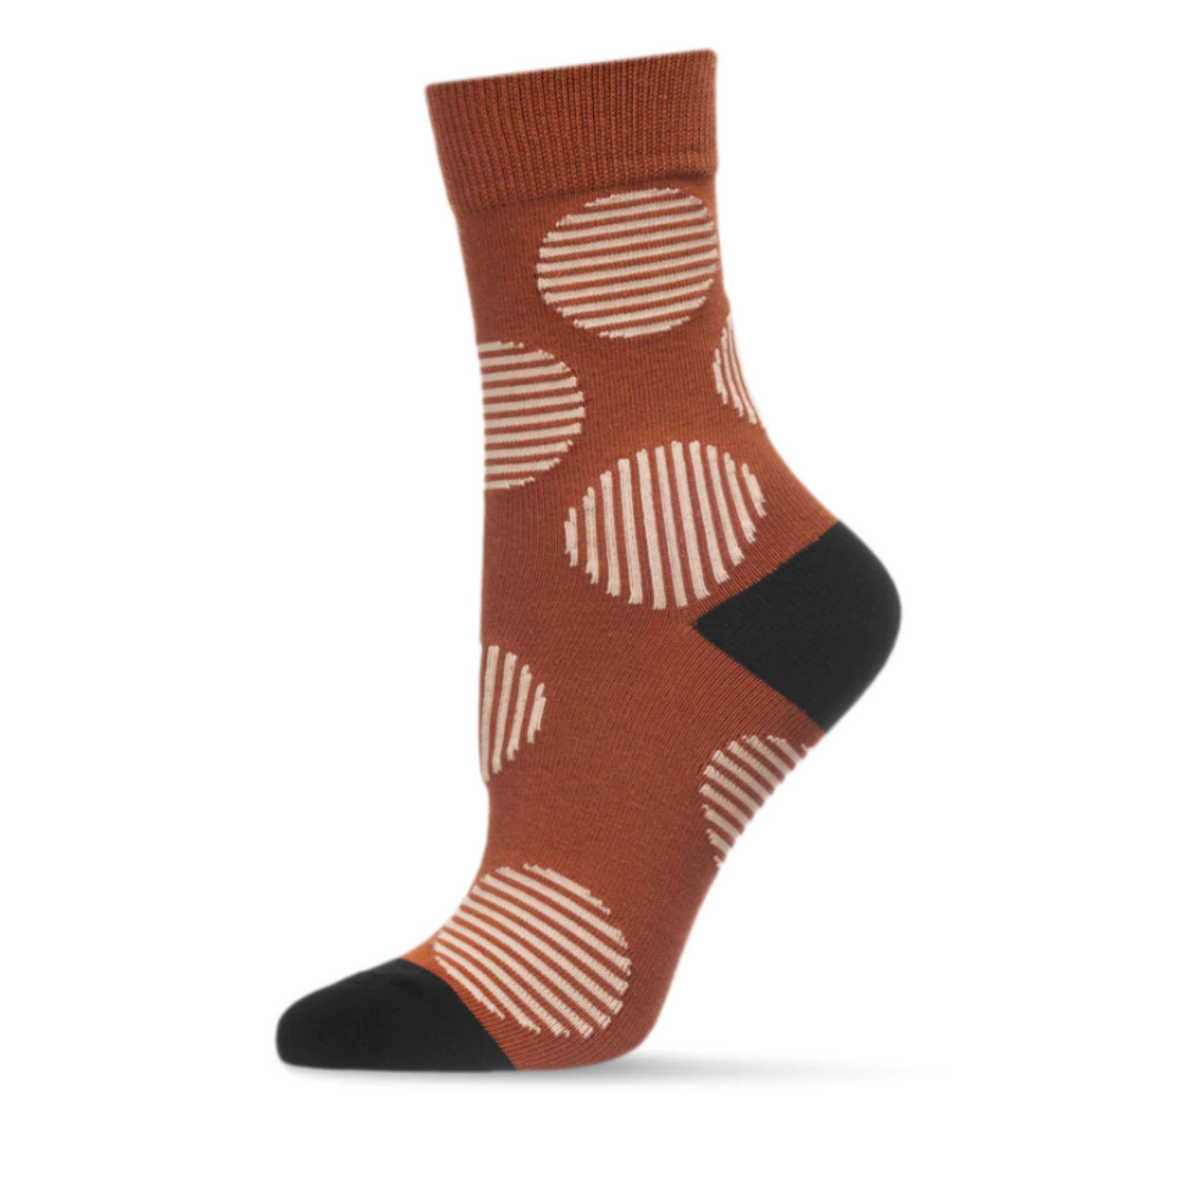 MeMoi Retro Circle women&#39;s Crew sock featuring brown sock with beige stripes in circle patterns all over. Socks shown on display foot from side.